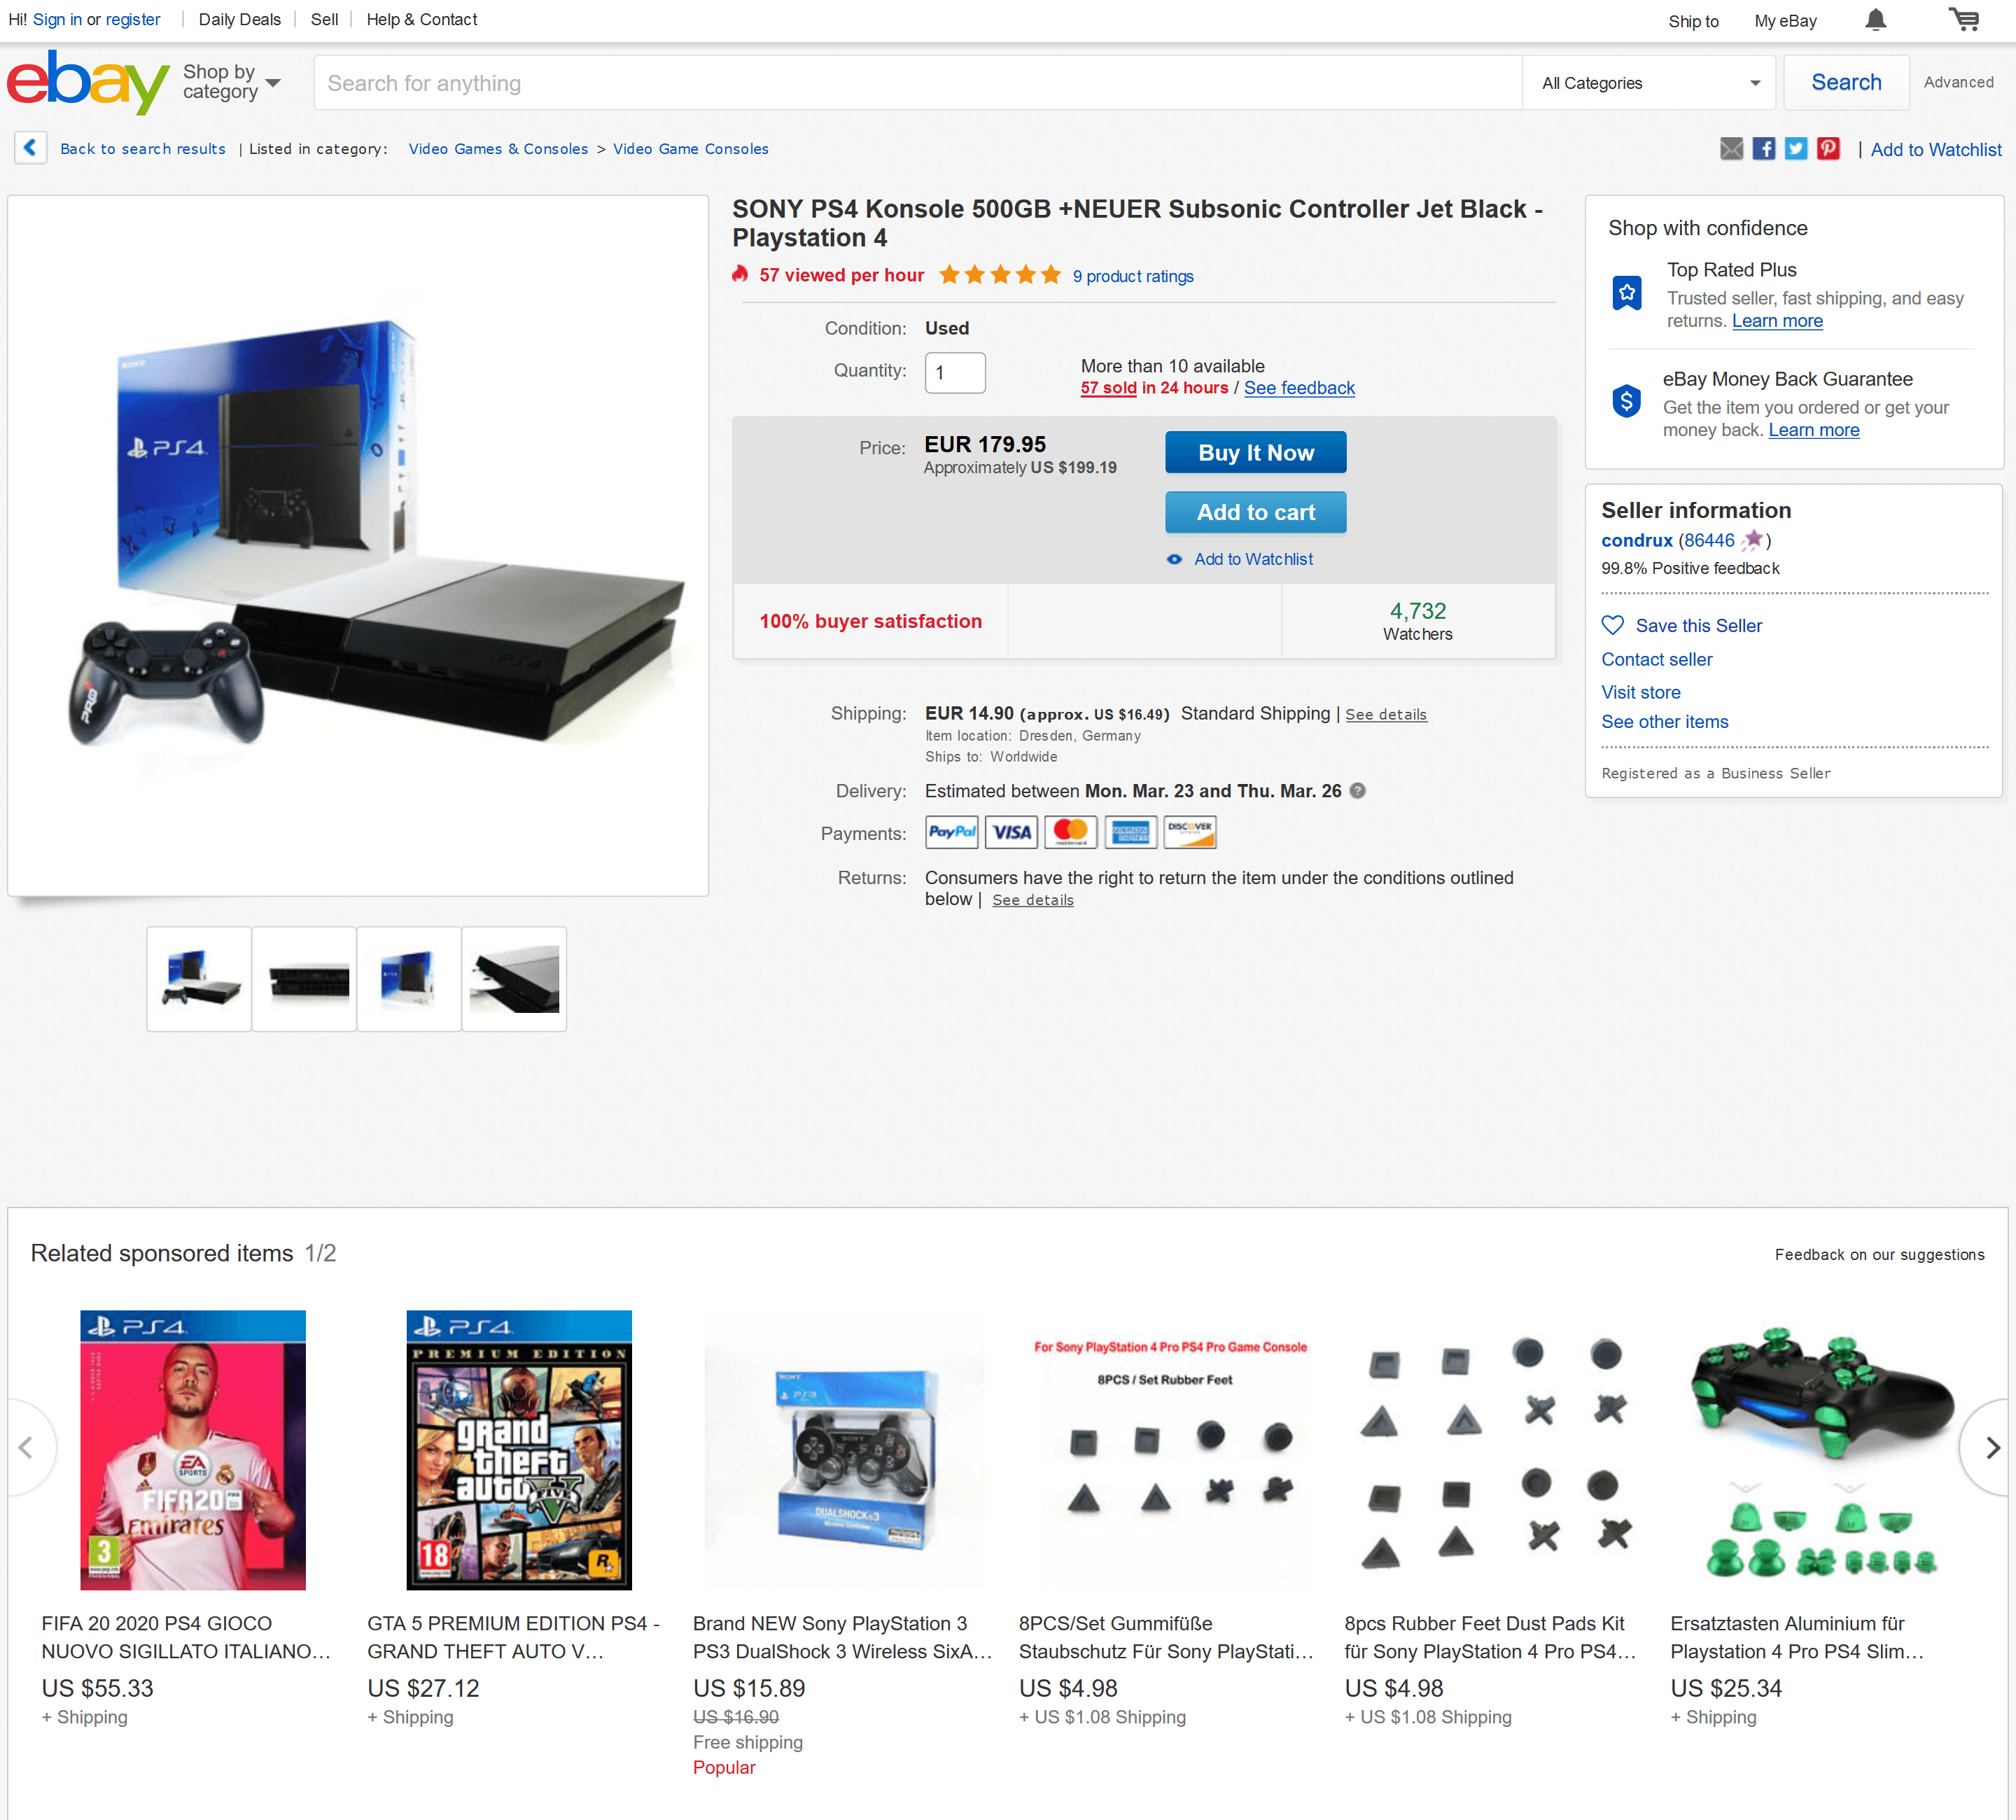 Ebay Items related to what’s on your wishlist